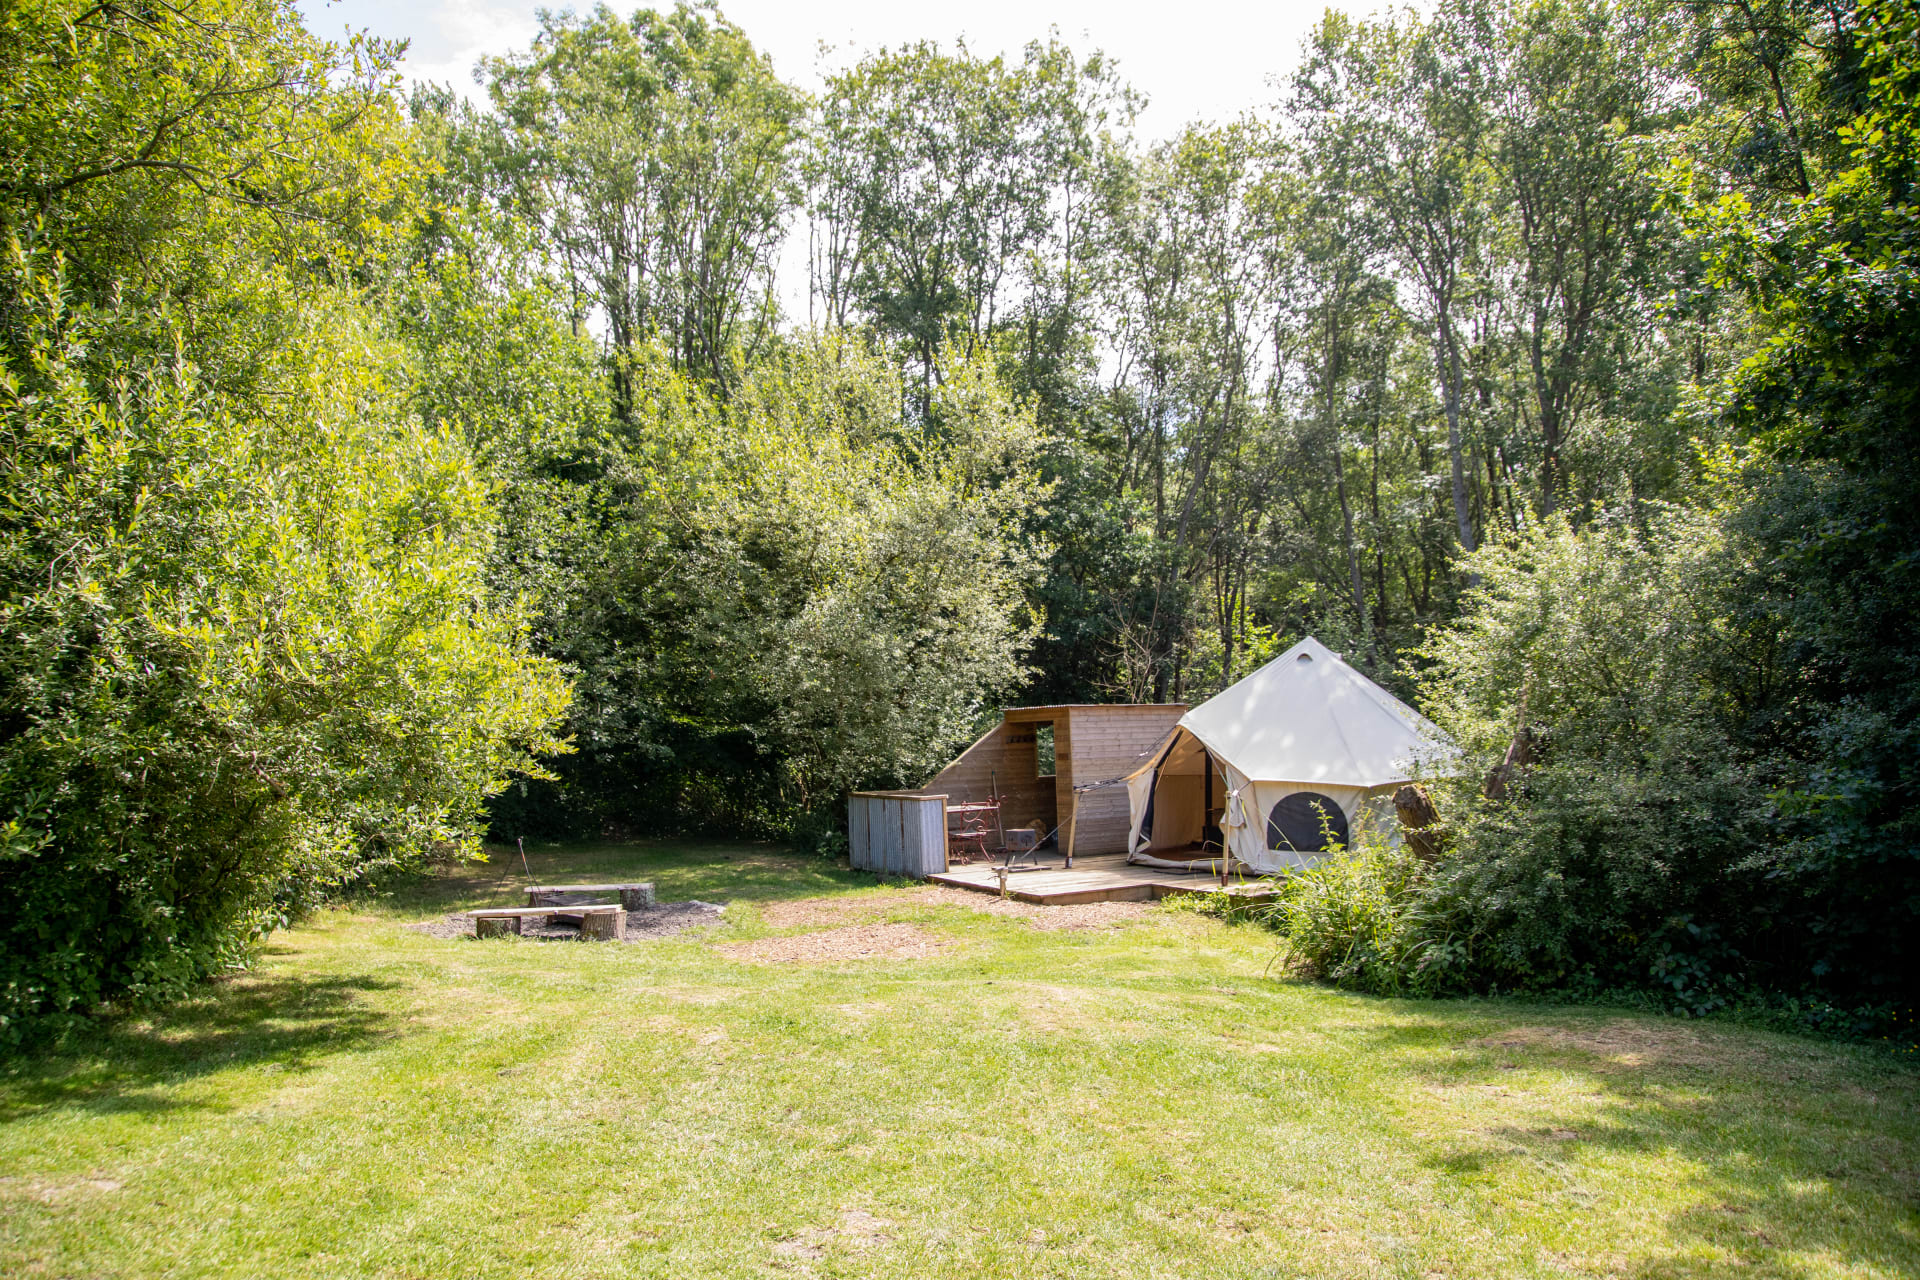 Discover the best campsites in United Kingdom with hot tub